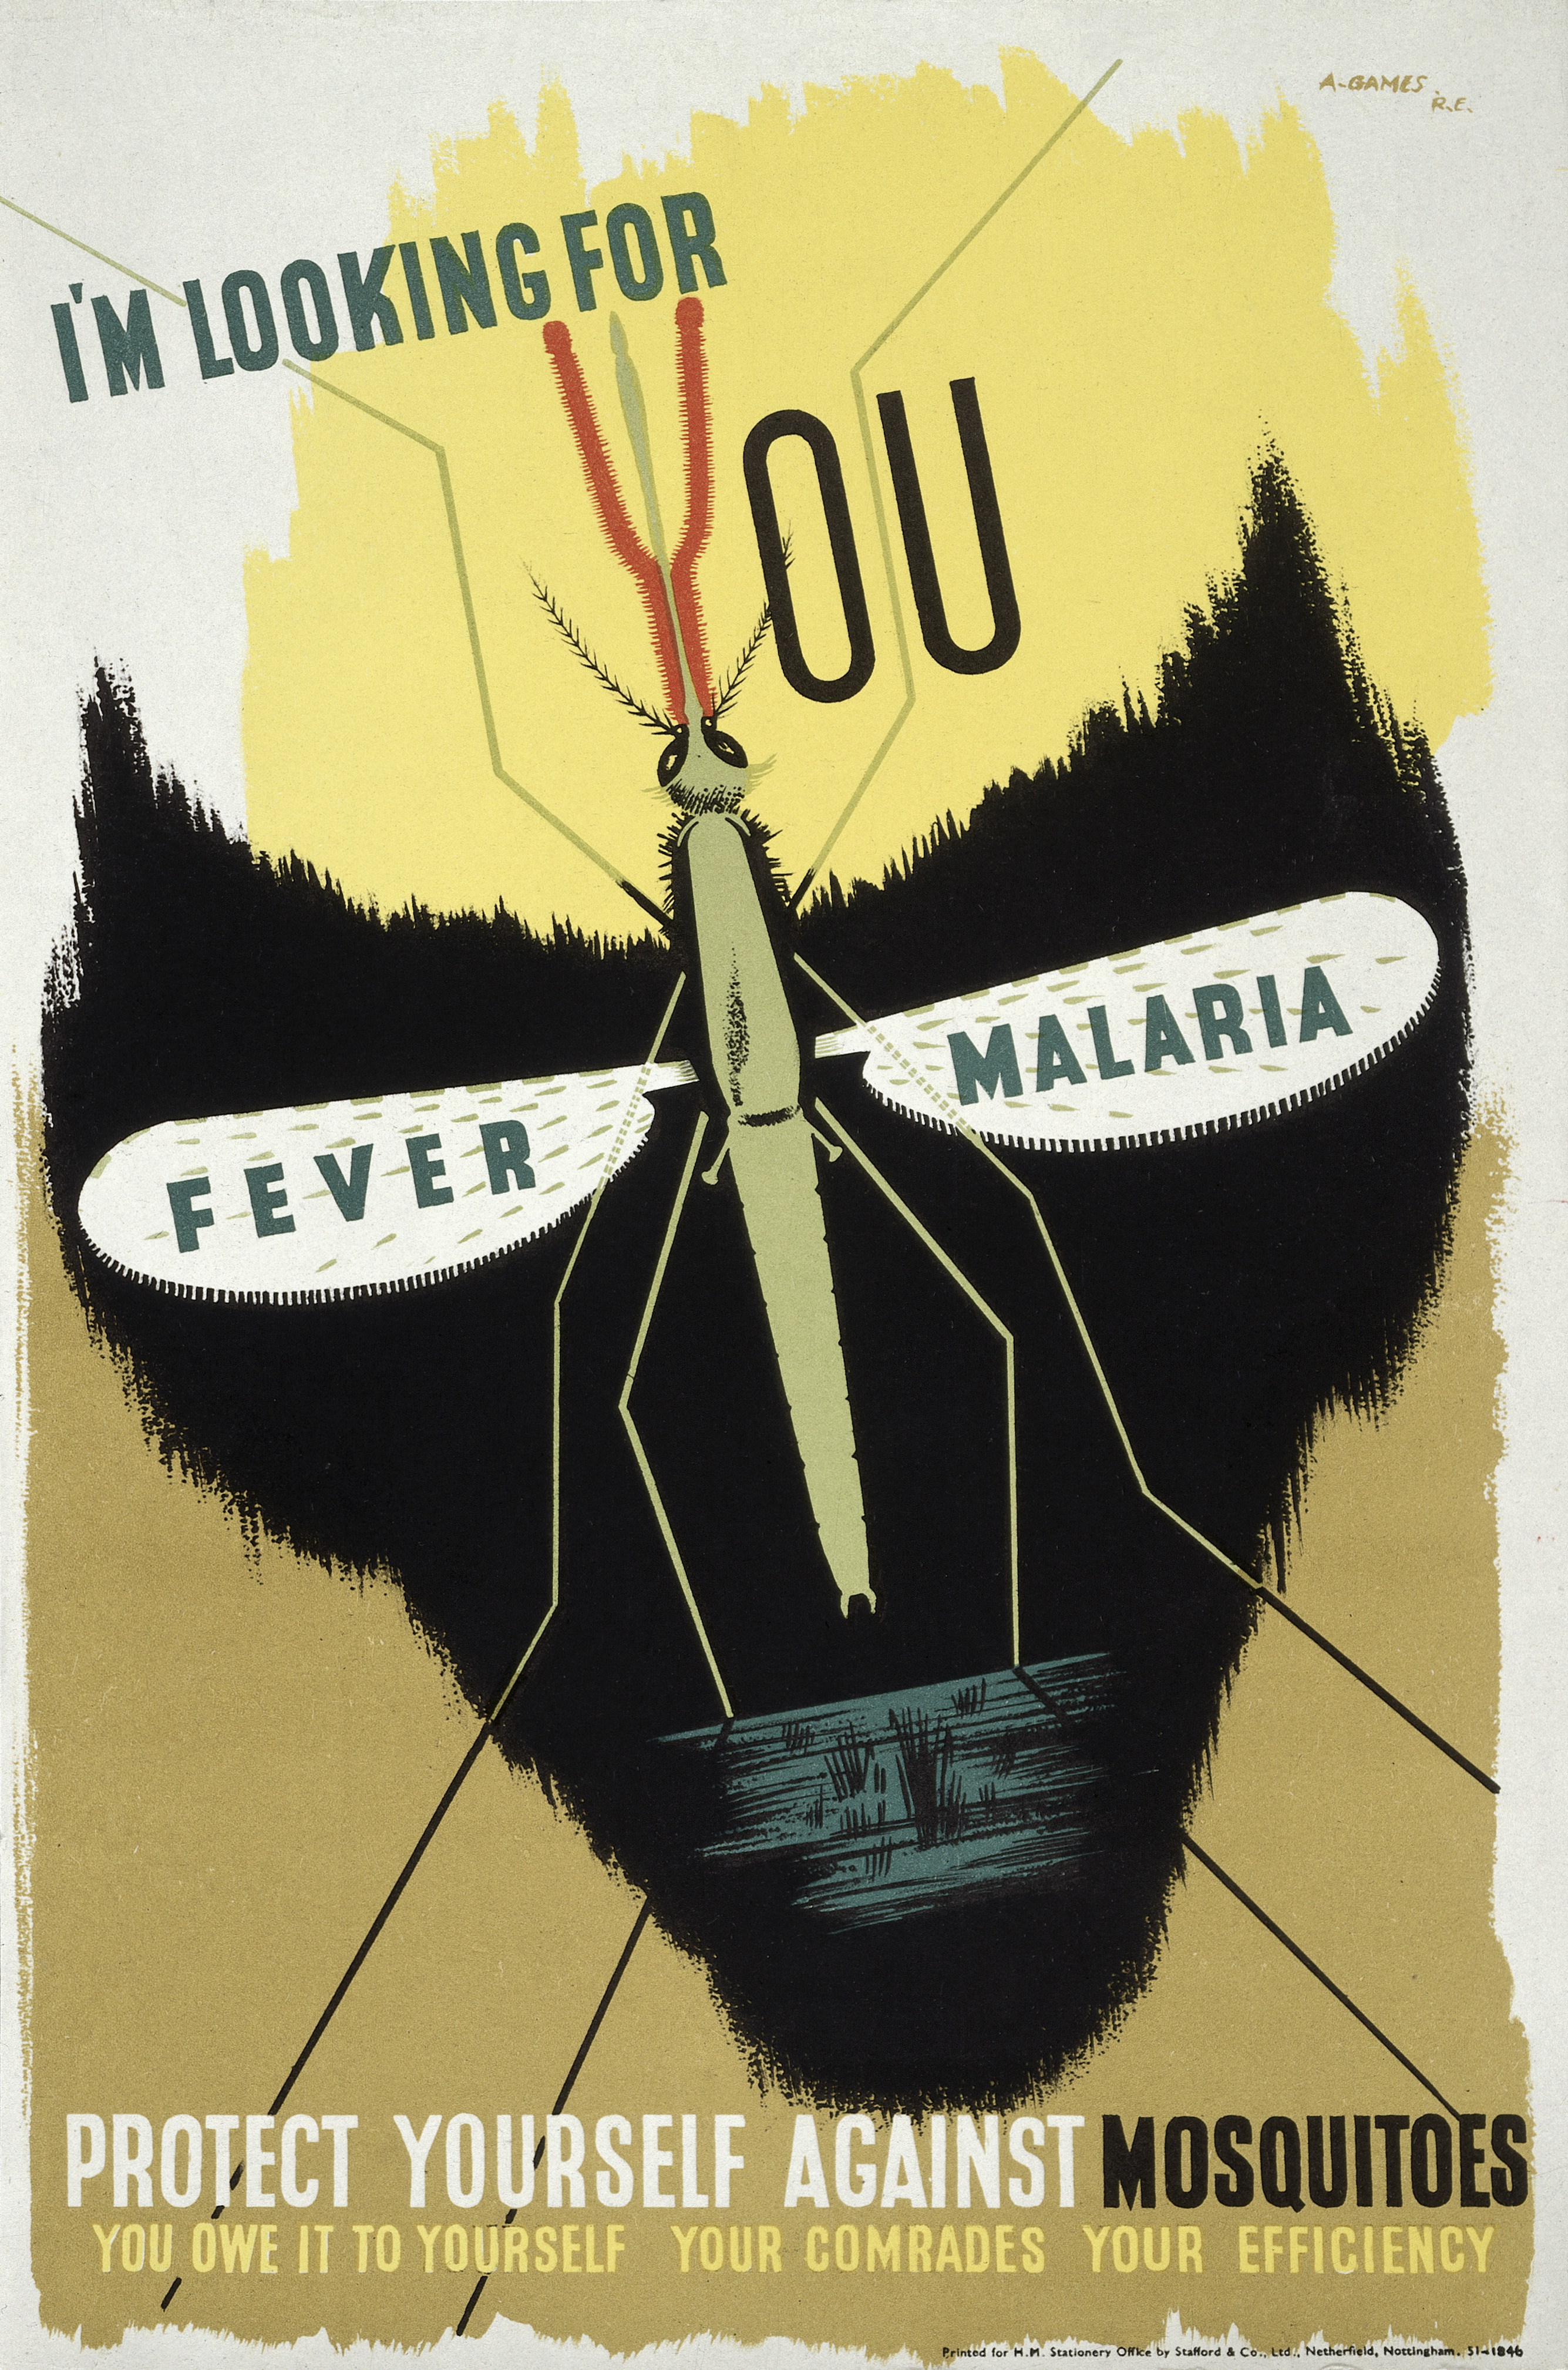 On this poster, a malaria mosquito forms the eye-sockets of a skull, representing death from malaria.